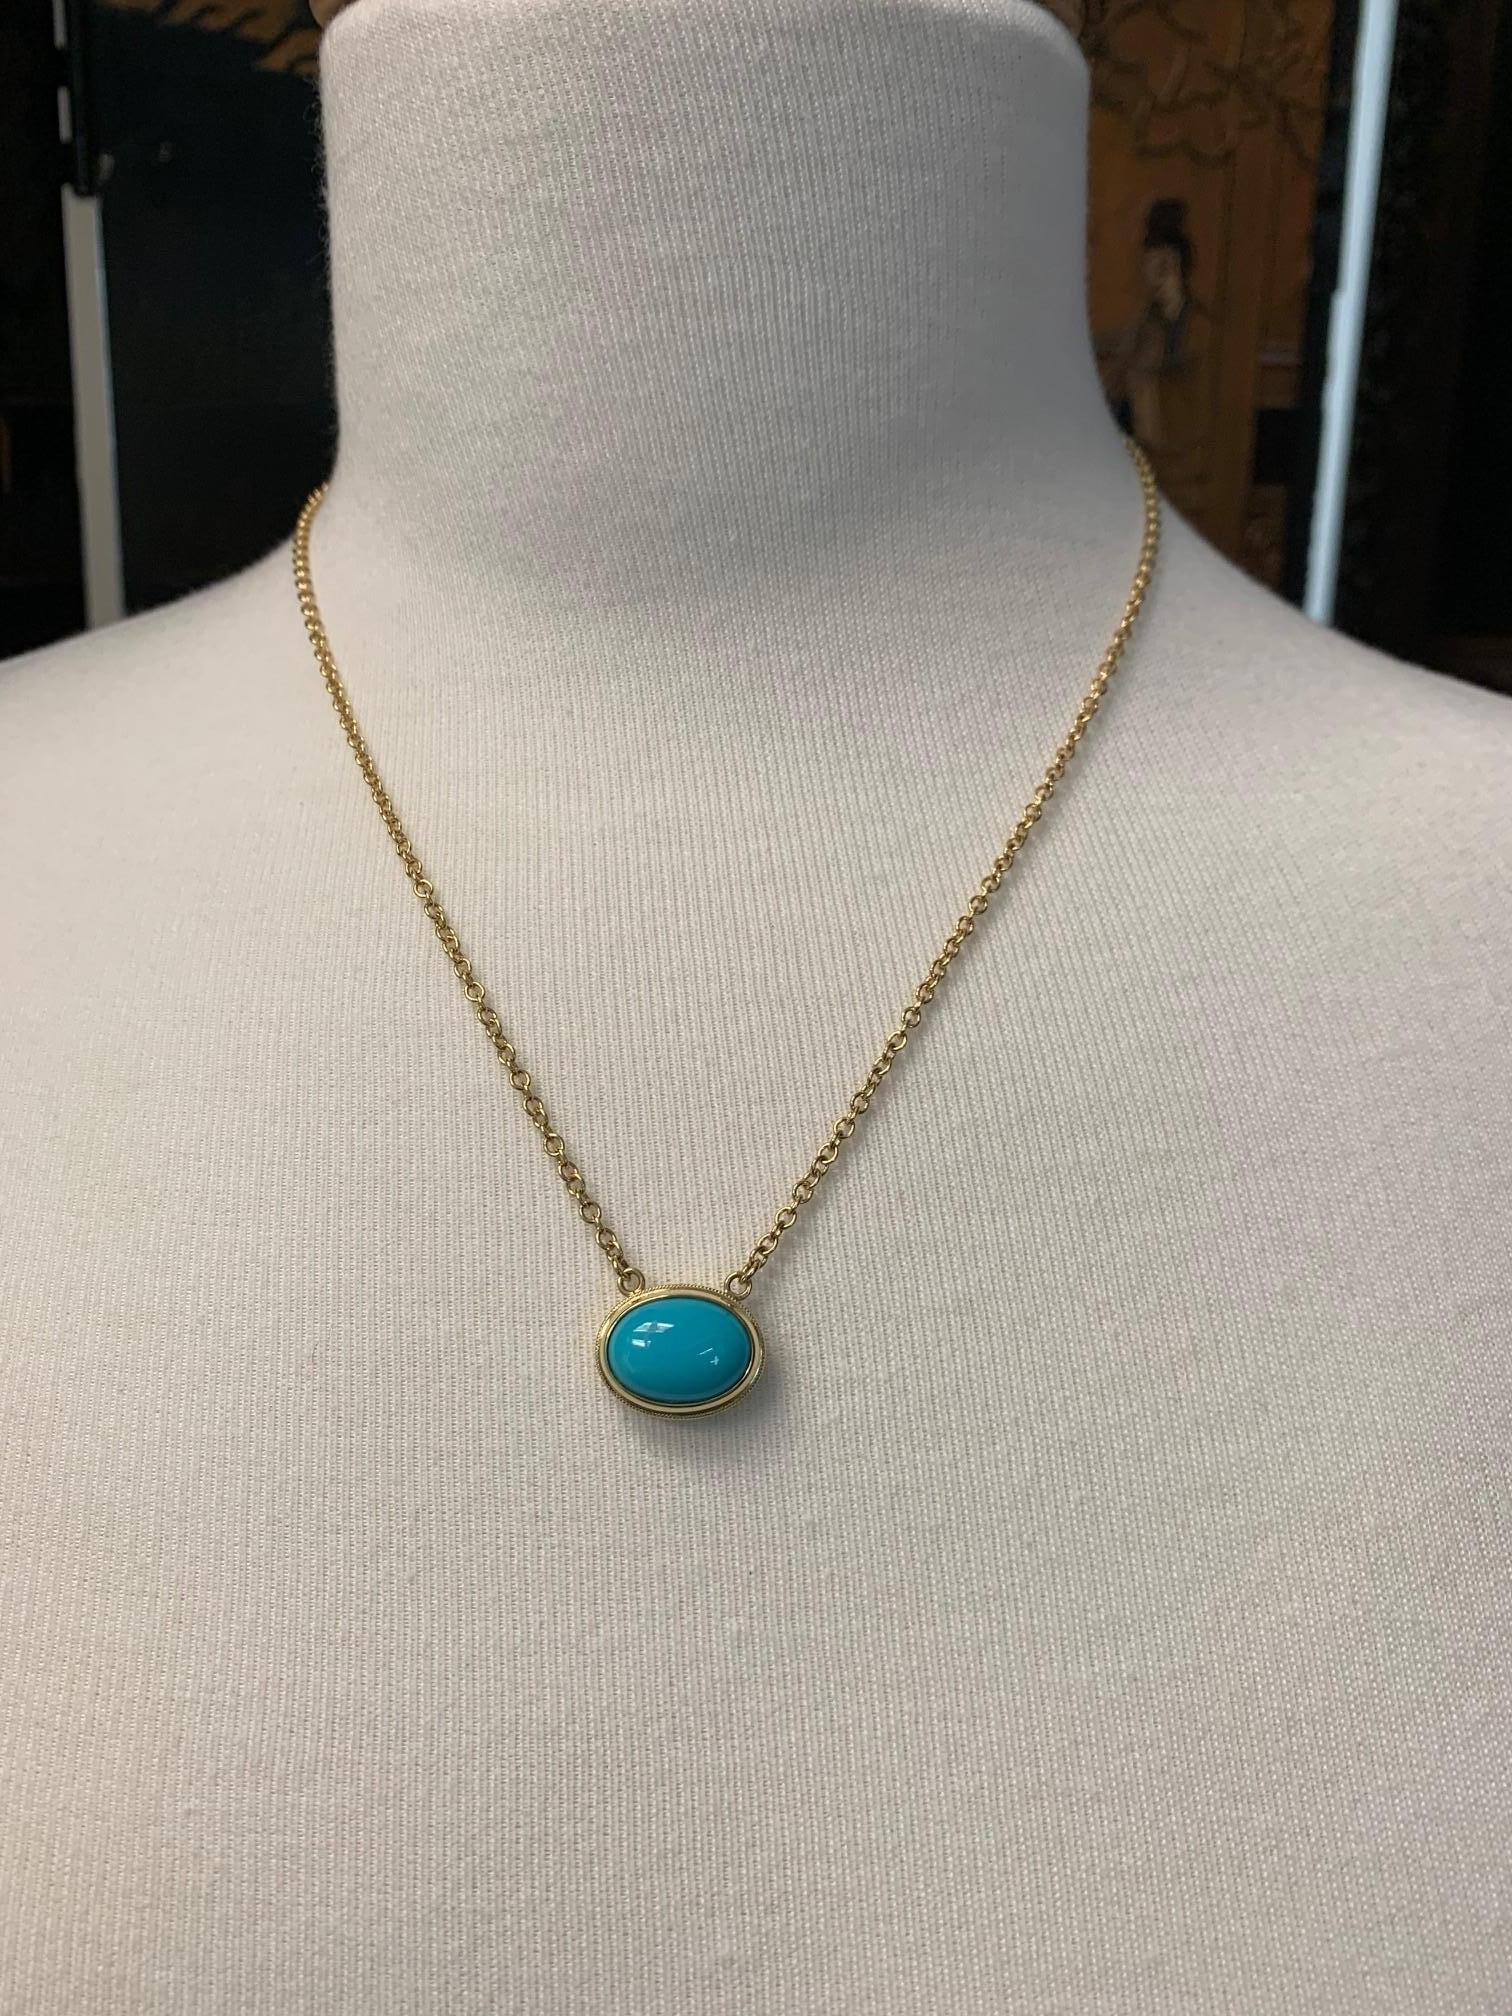 Artisan 6.79 Carat Sleeping Beauty Turquoise Cabochon and 18k Yellow Gold Chain Necklace